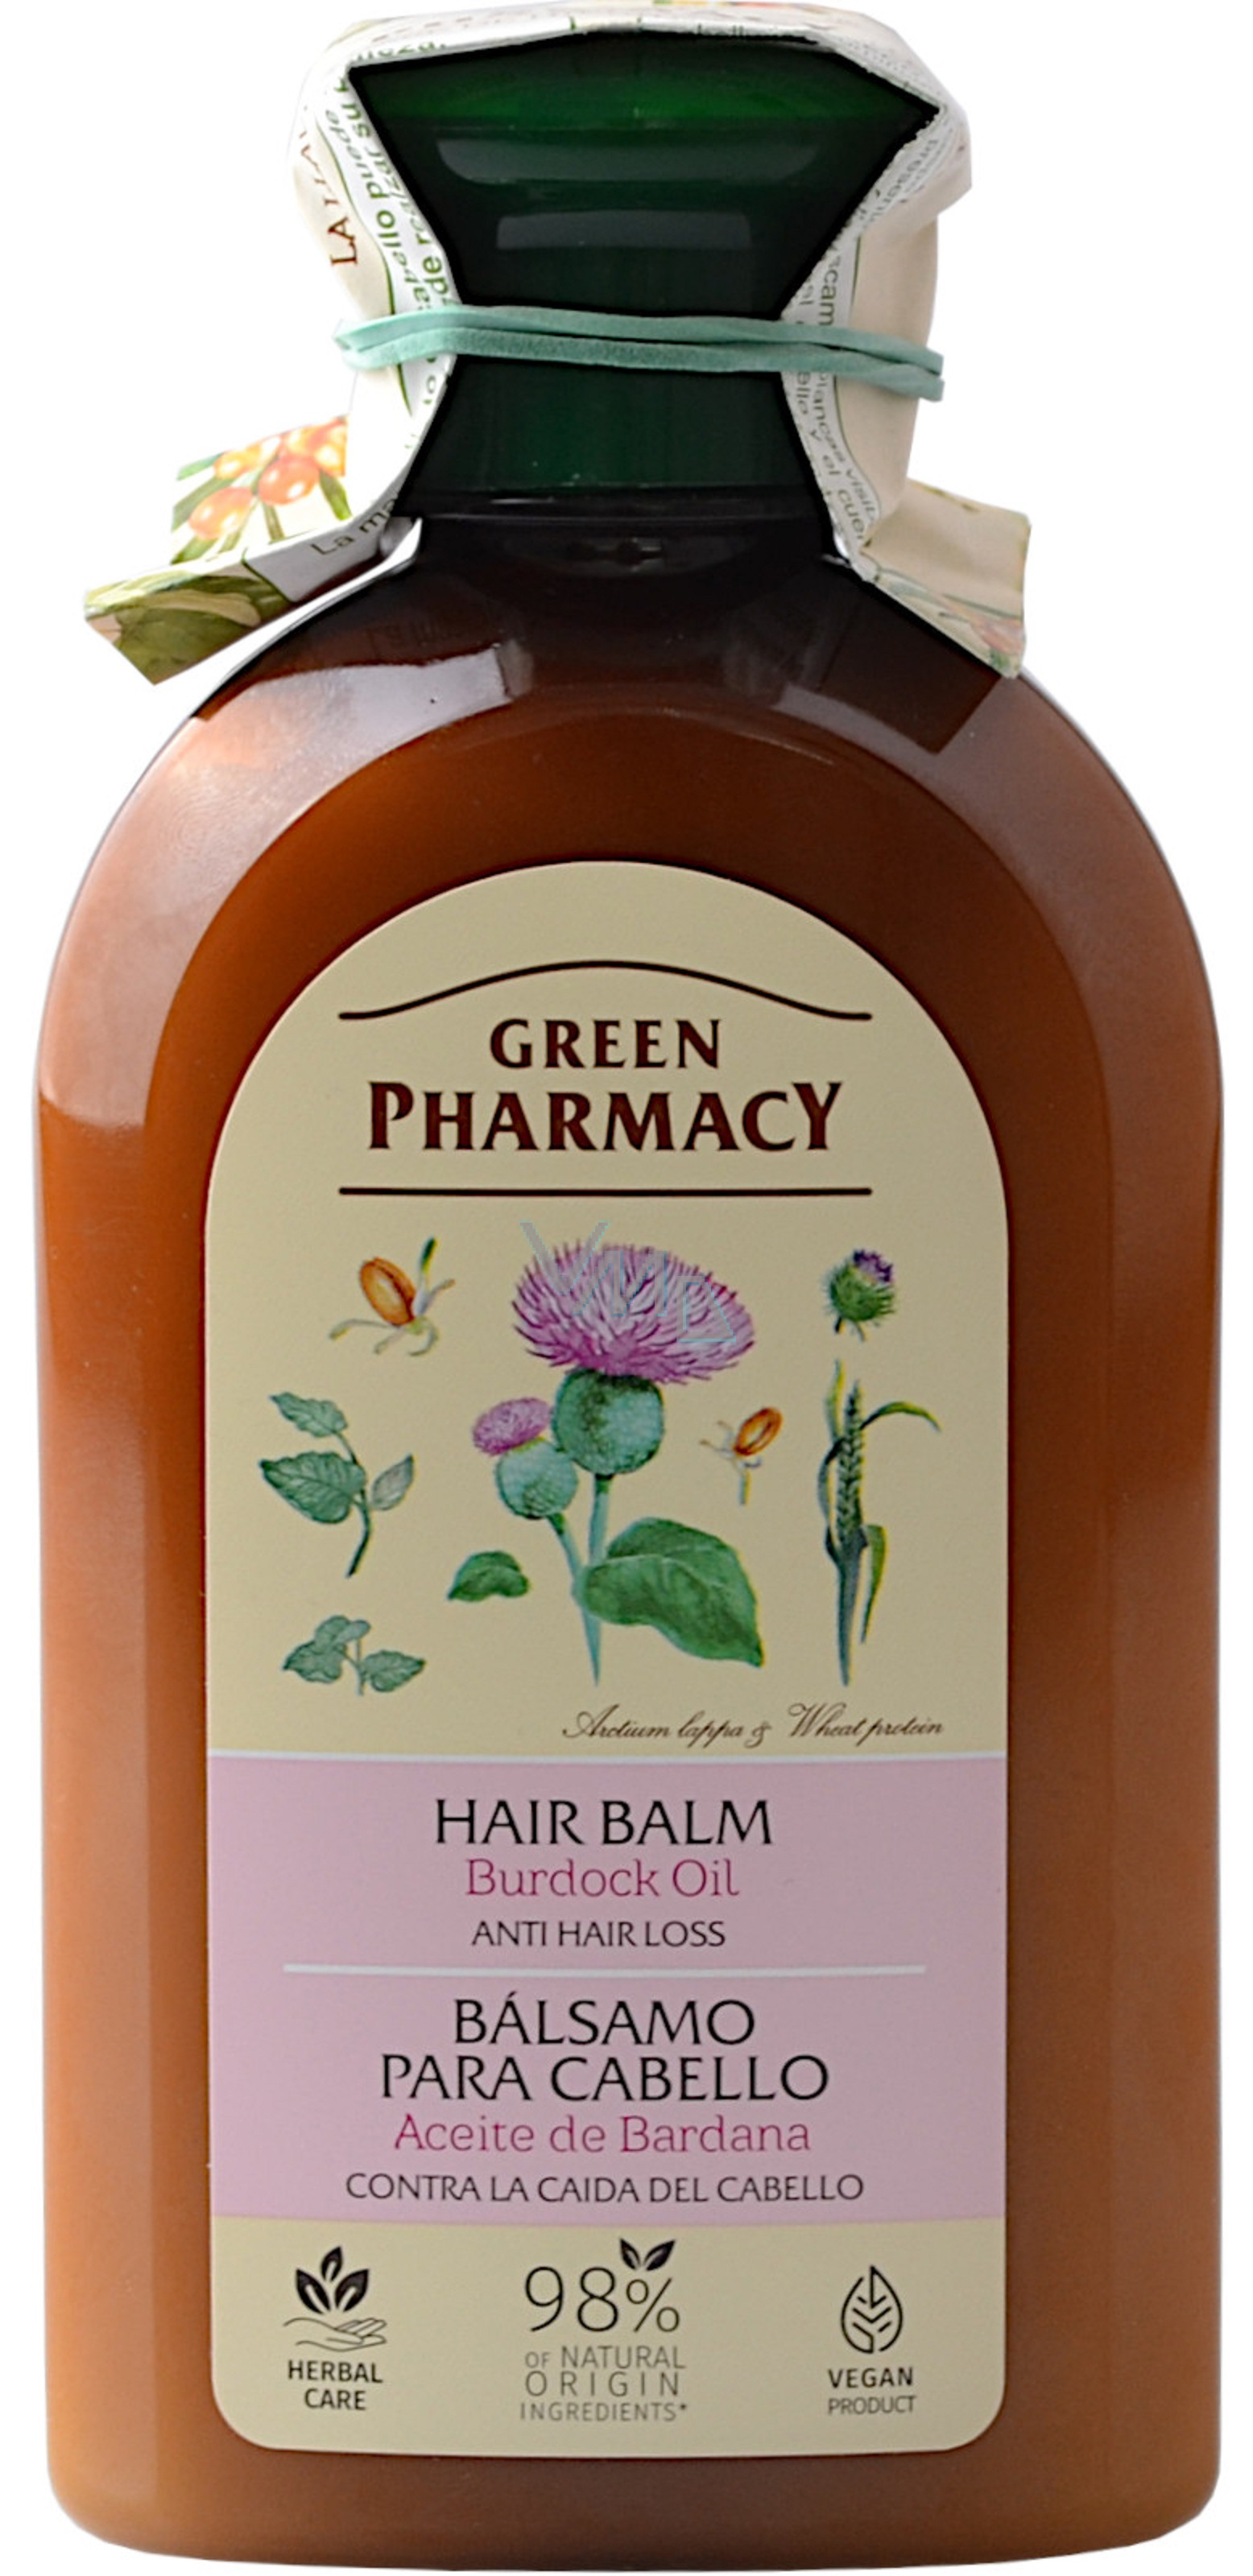 Green Pharmacy Burdock and Wheat Proteins Conditioner Mask against hair loss  300 ml - VMD parfumerie - drogerie